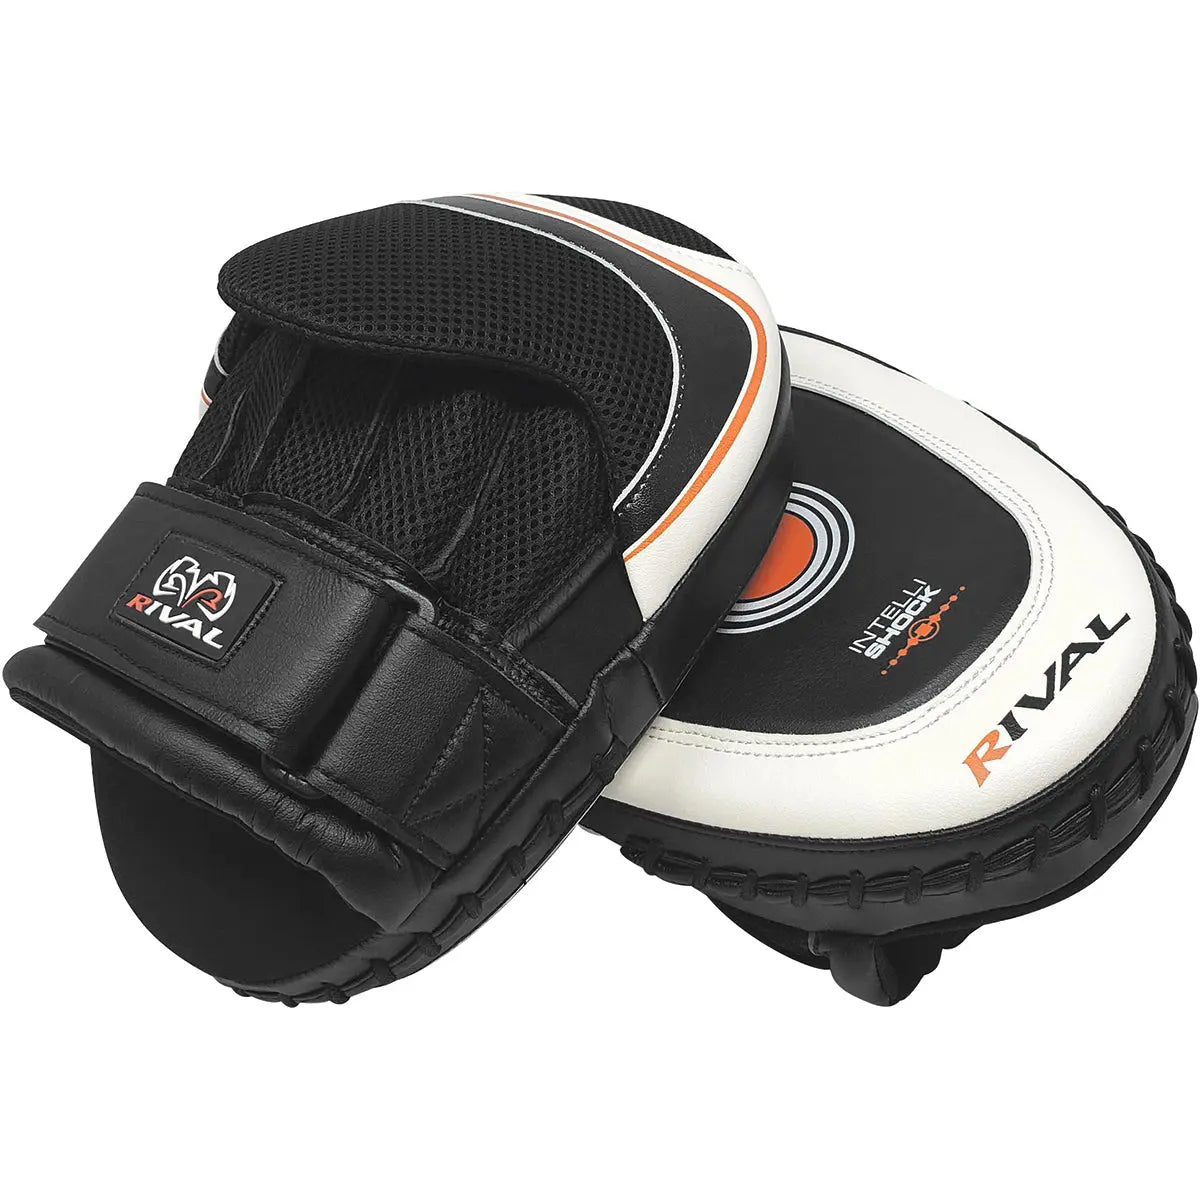 RIVAL Boxing RPM10 Intelli-Shock Punch Mitts 2.0 RIVAL